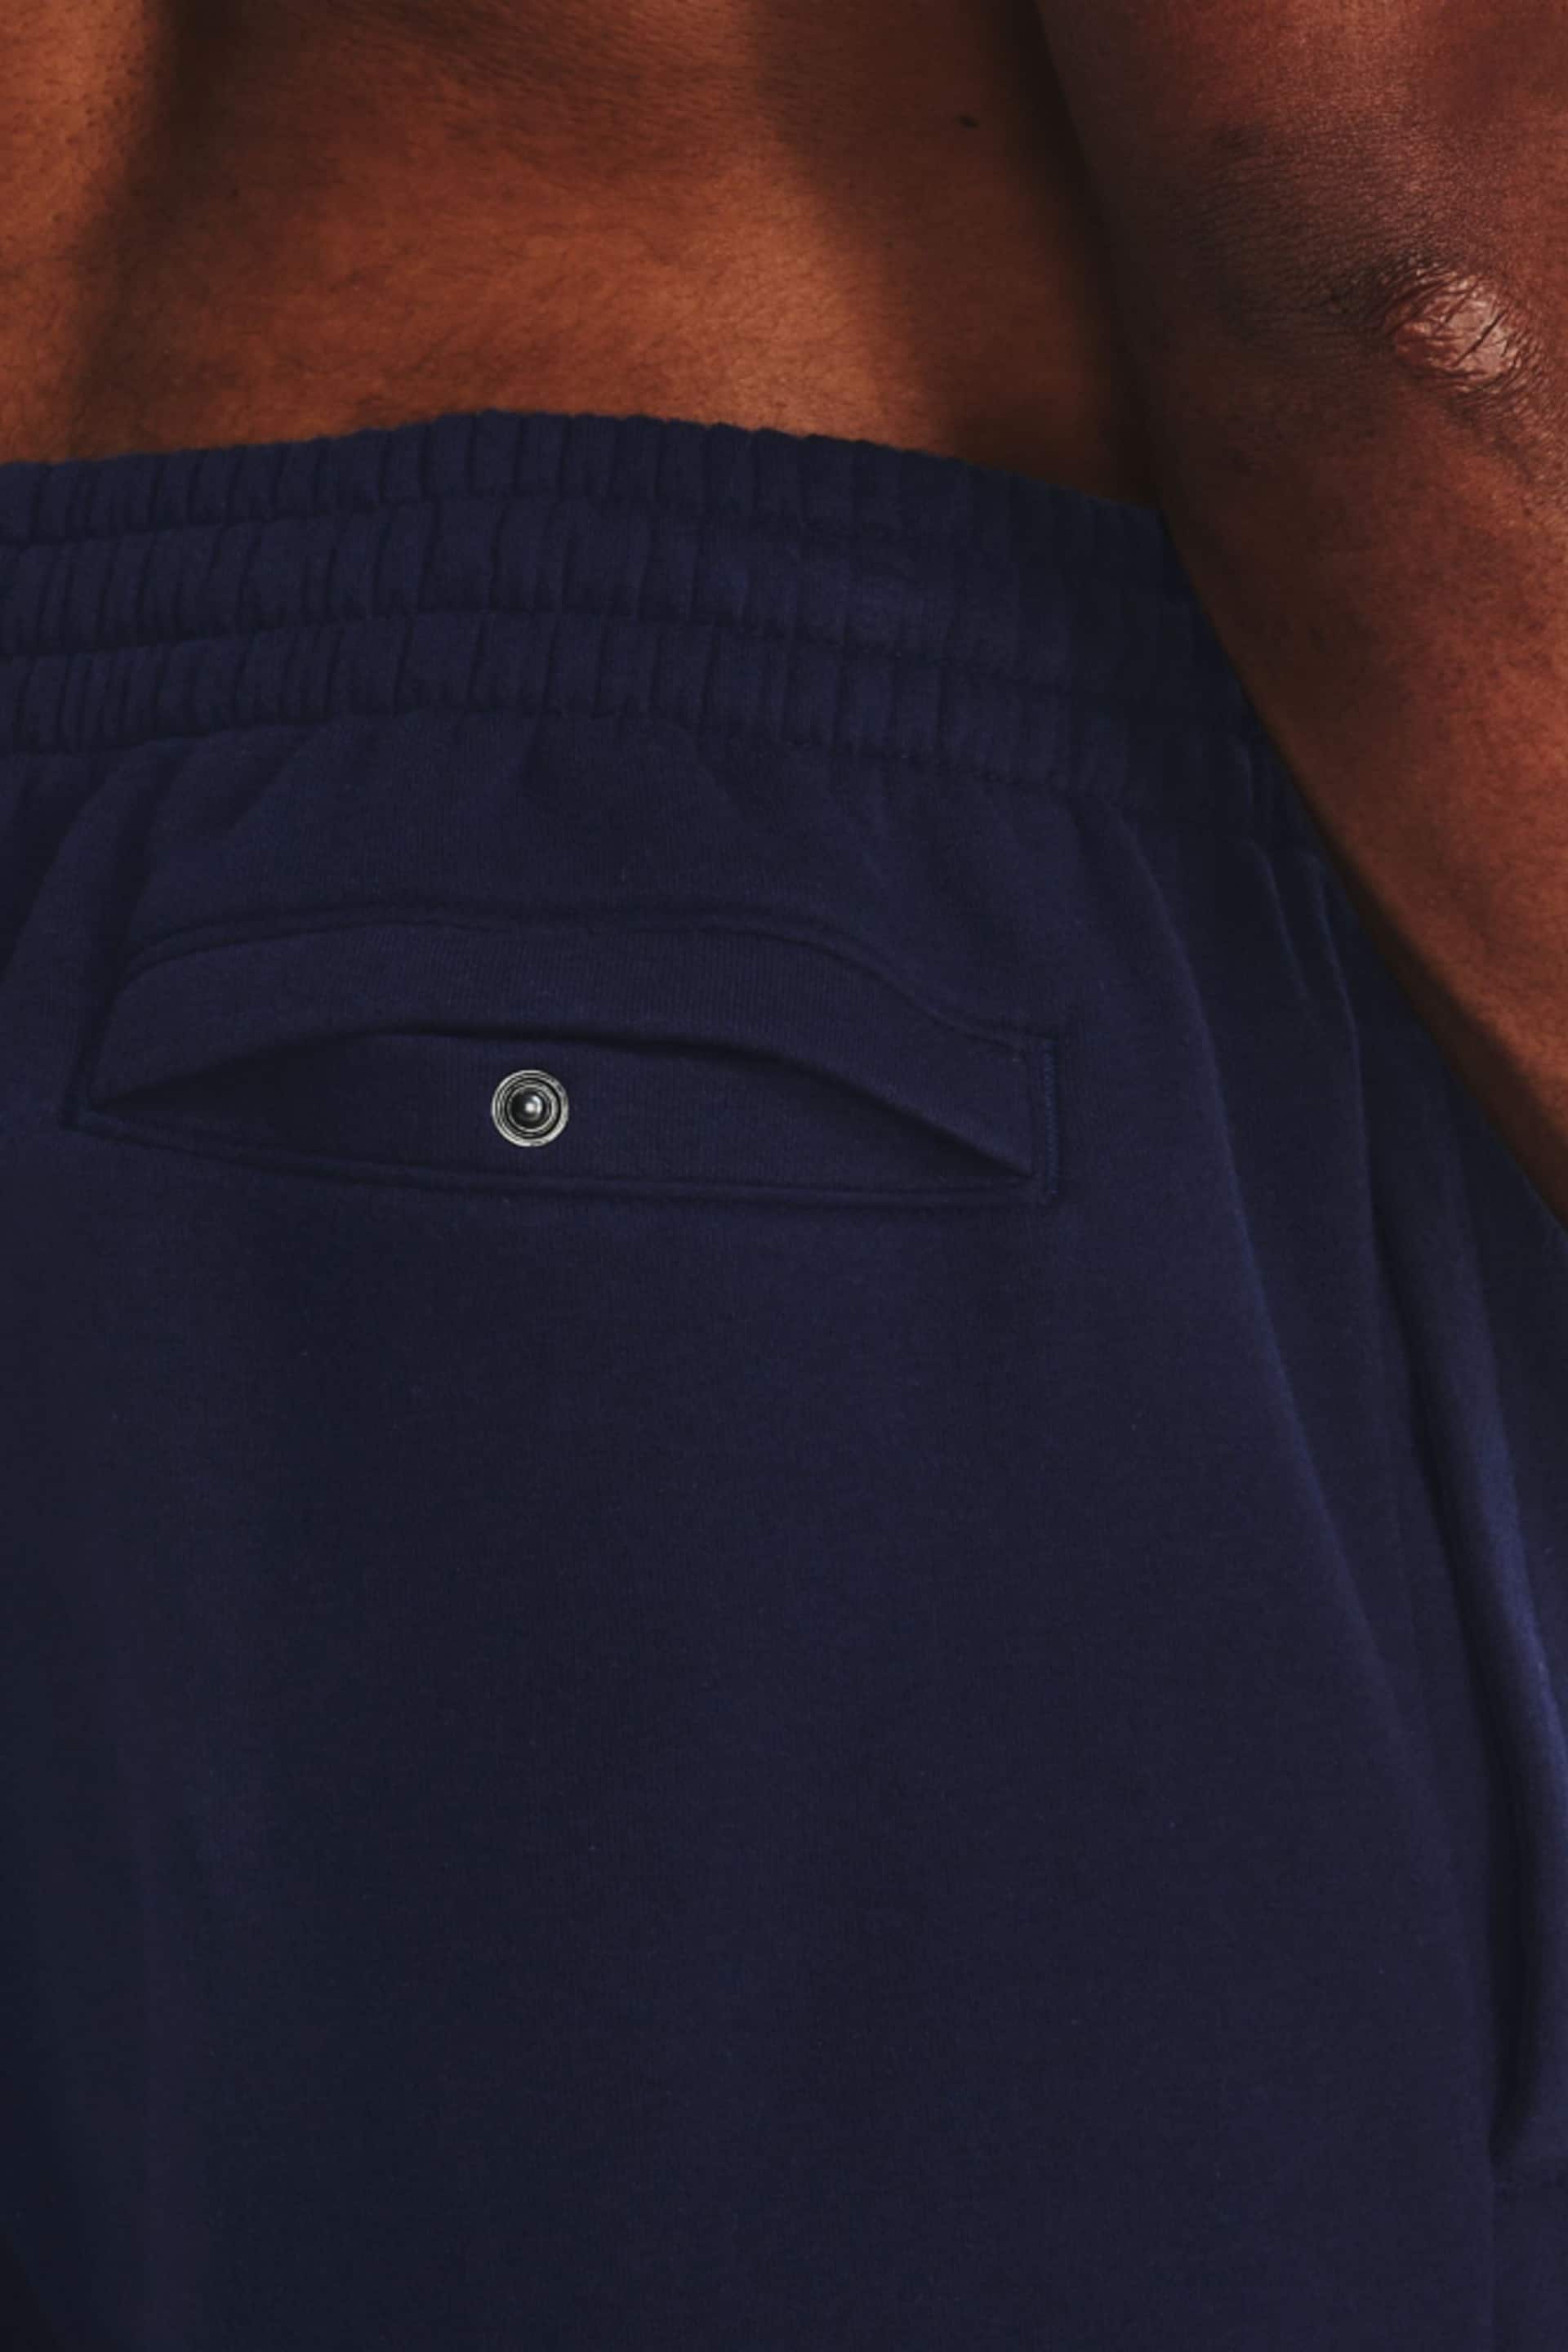 Under Armour Navy Blue/White Rival Fleece Shorts - Image 4 of 6